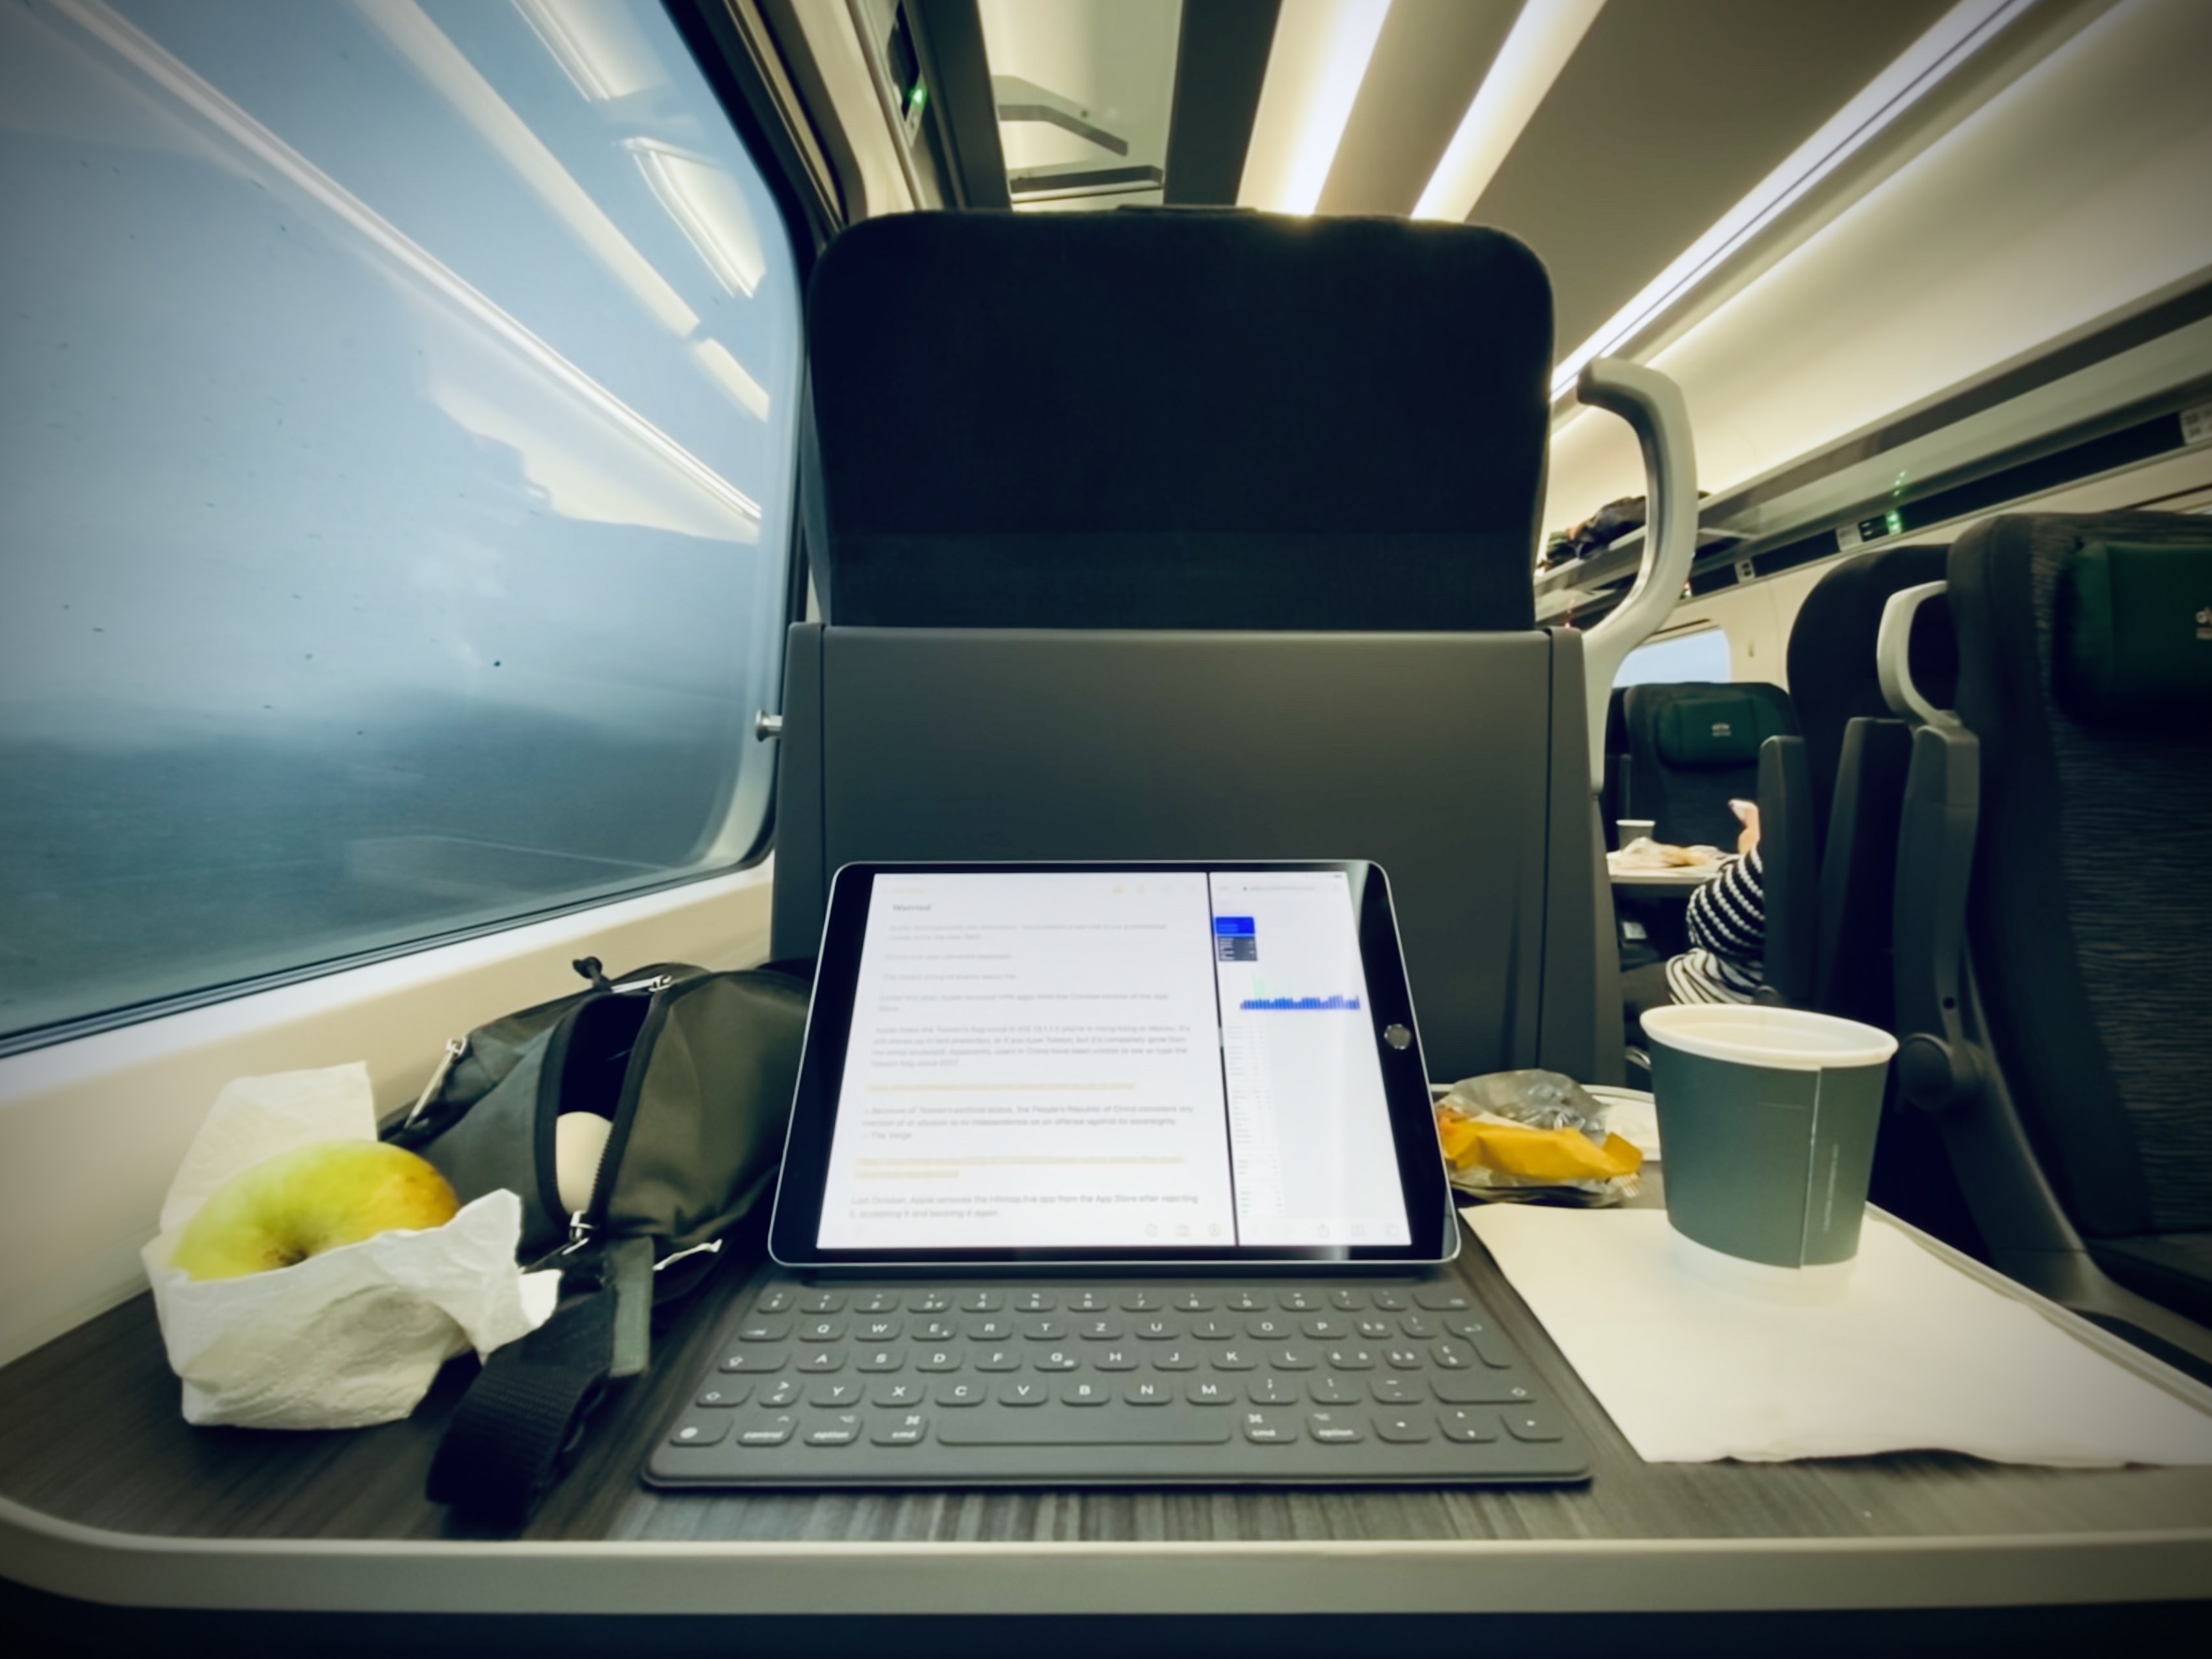 Tray table with an iPad and coffee mug facing the direction of travel